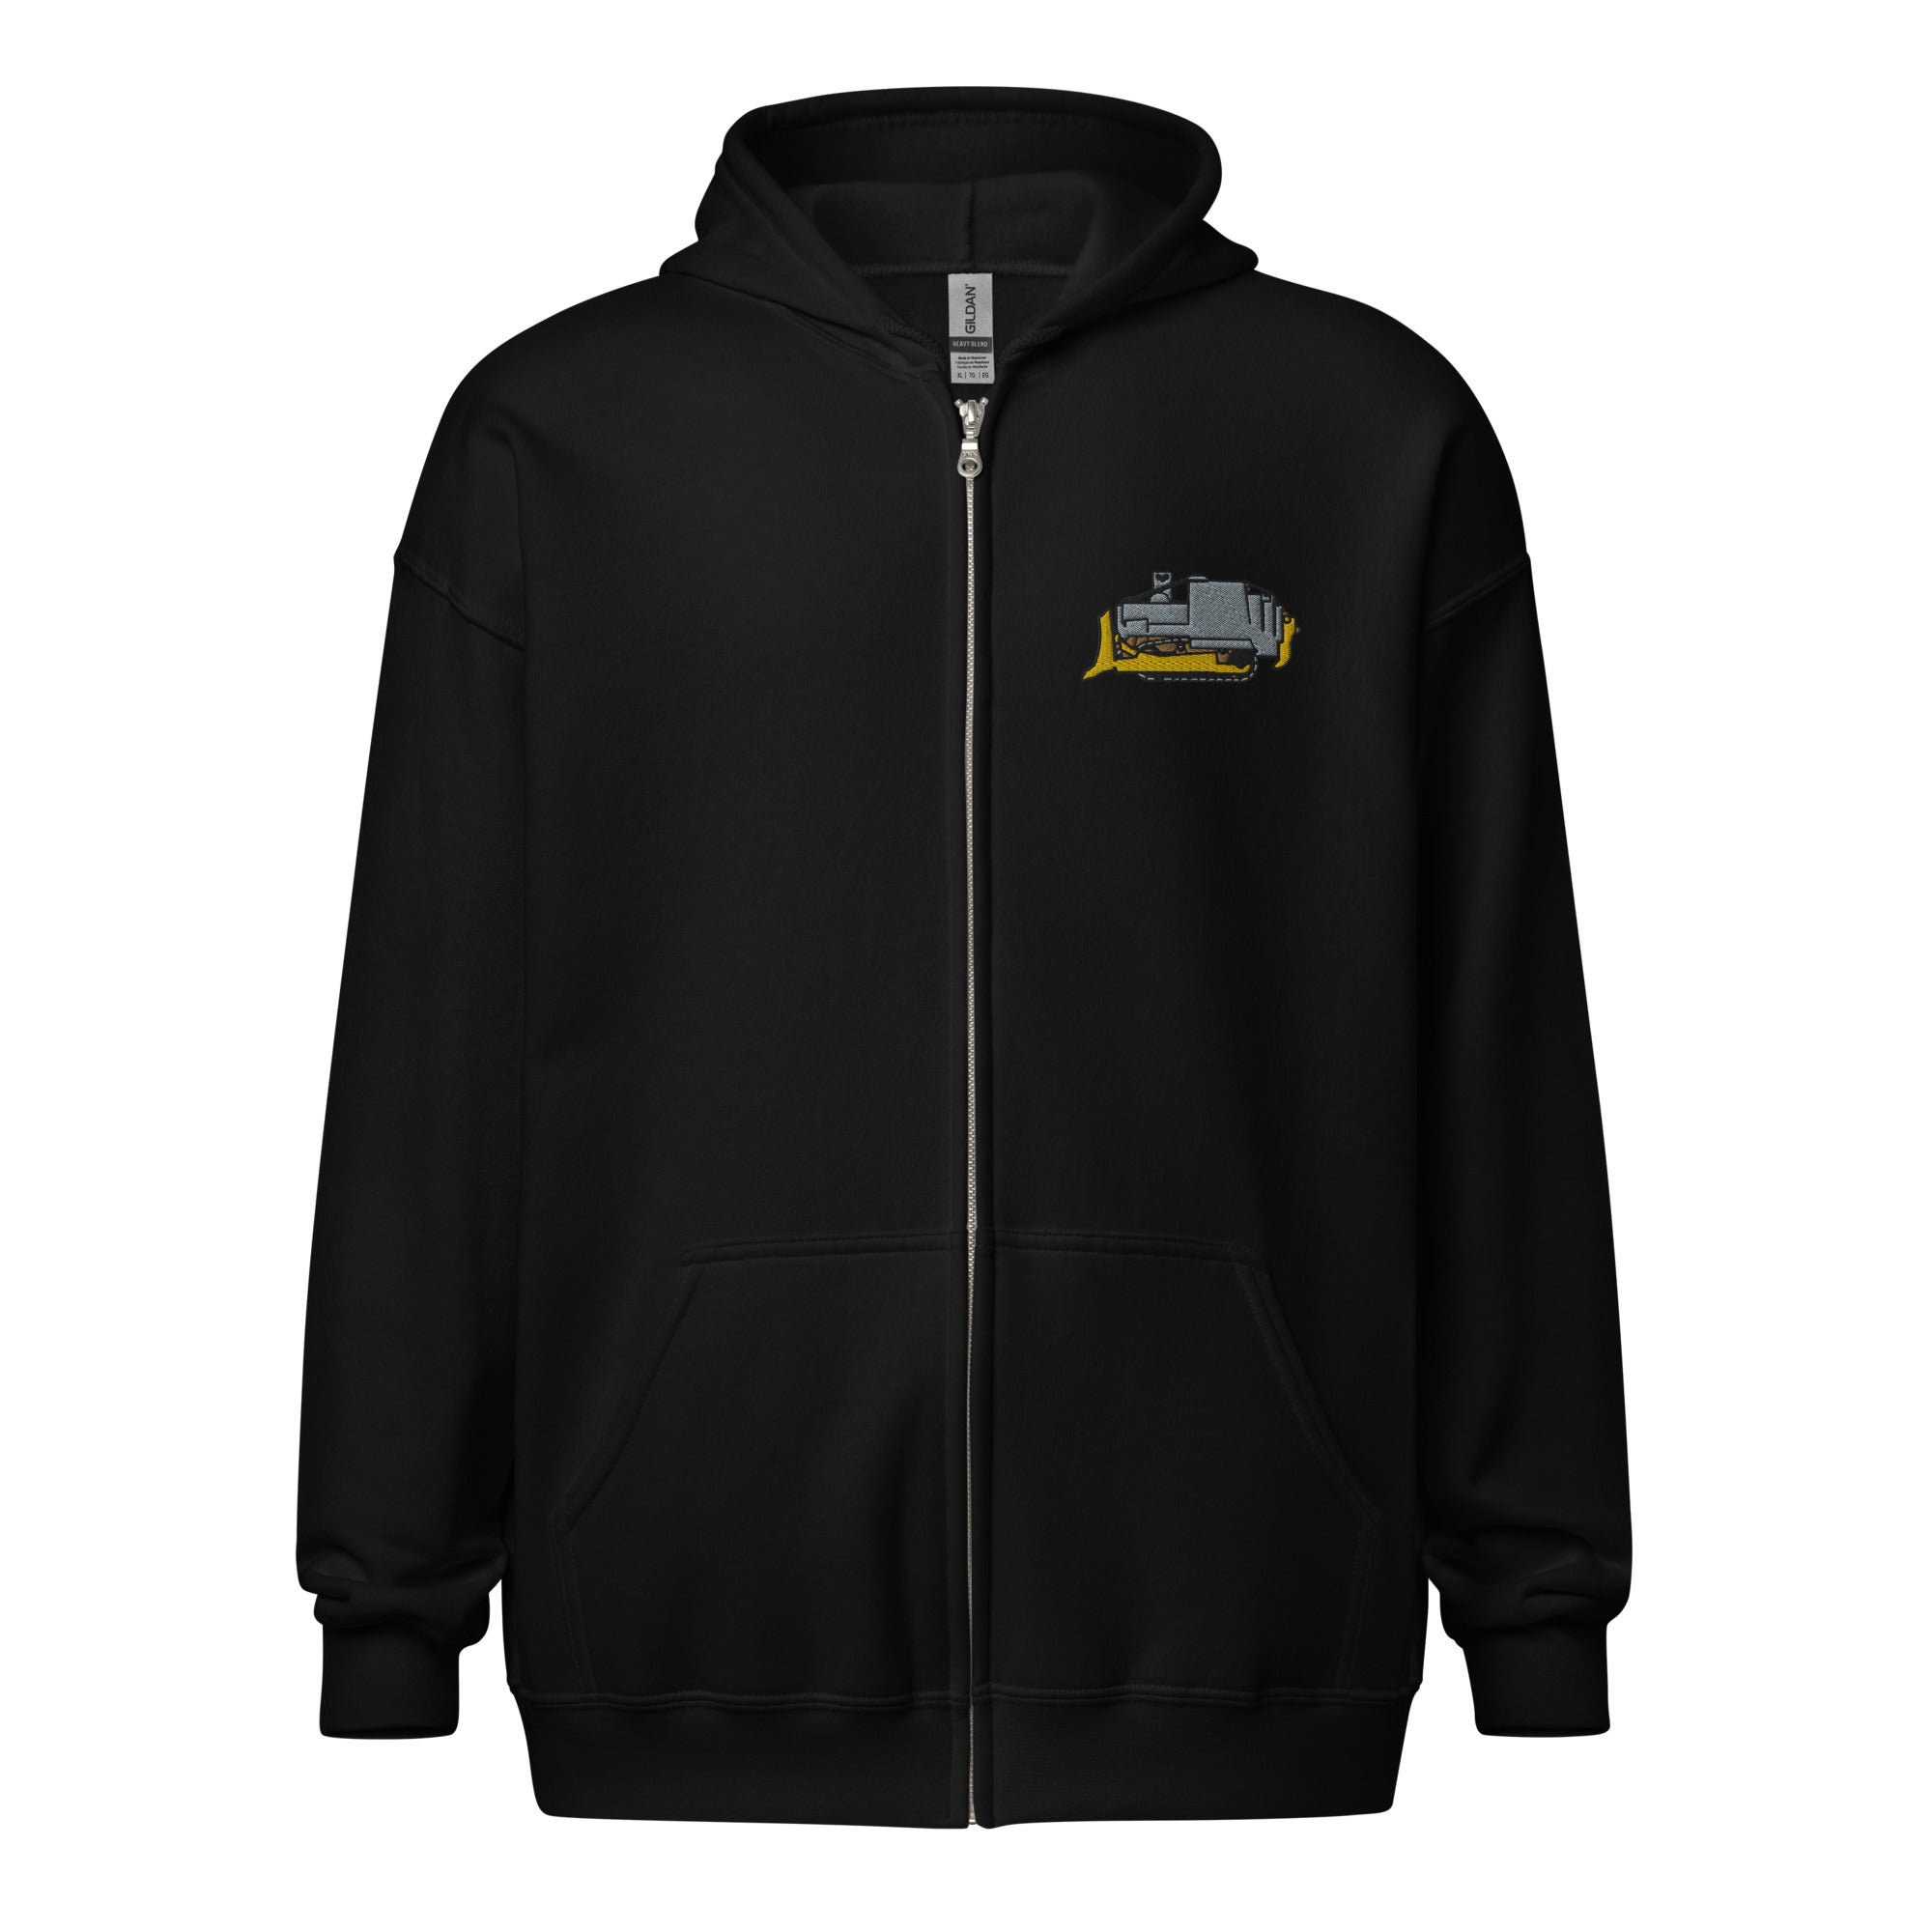 The Killdozer Embroidered Heavy Blend Zip Hoodie